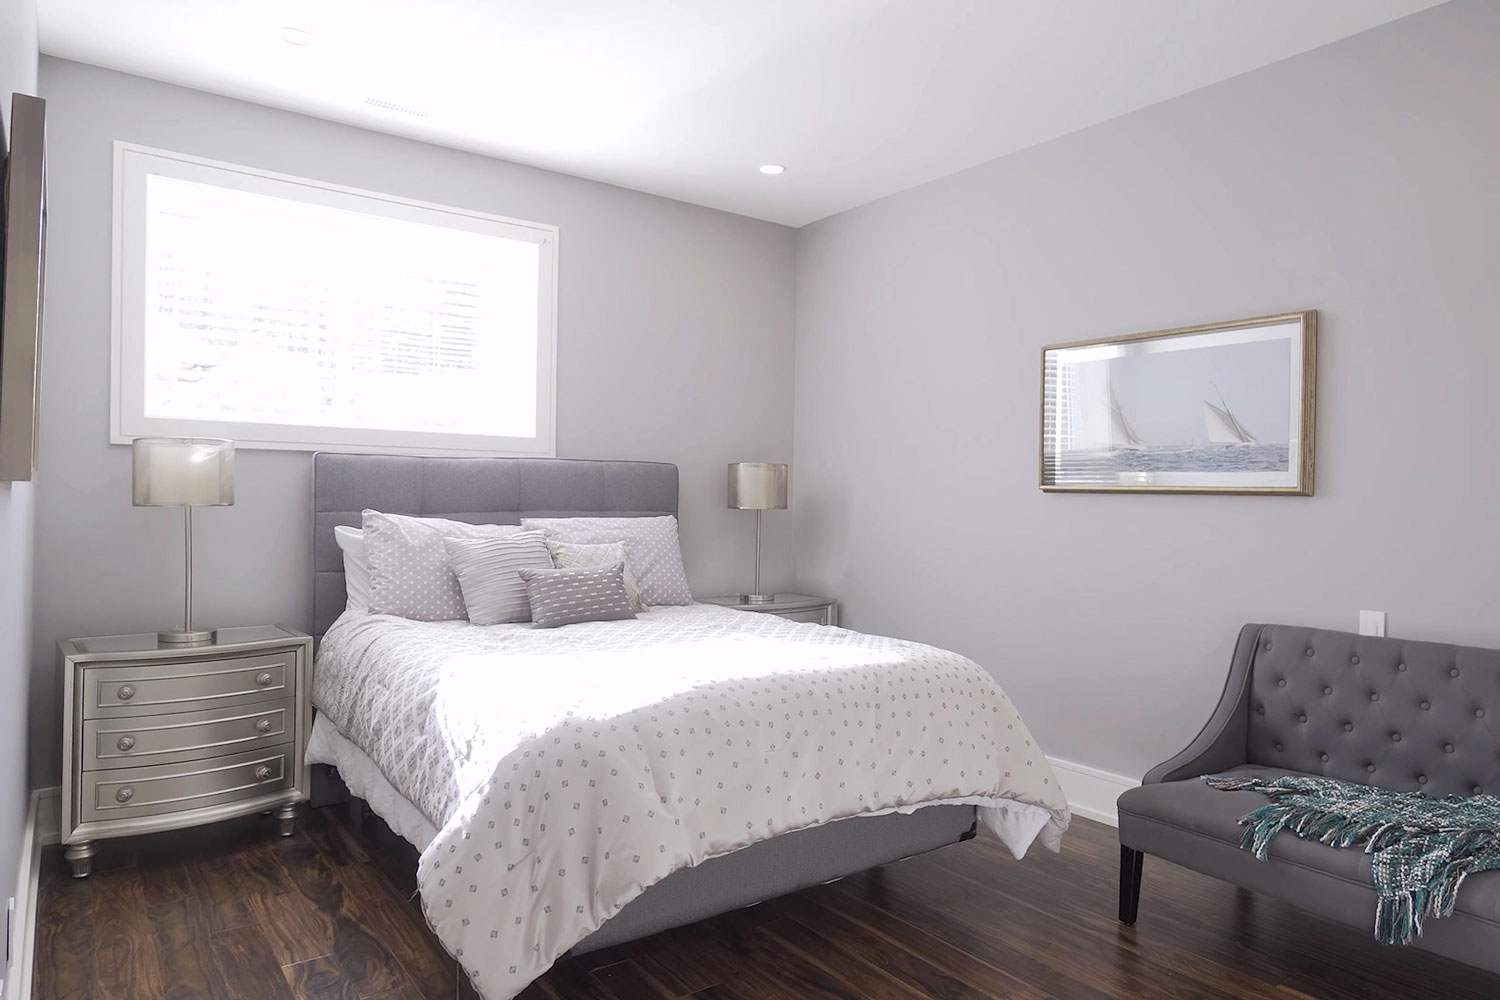 Narrow bedroom with gray painted walls, wooden flooring and white polka dotted beddings